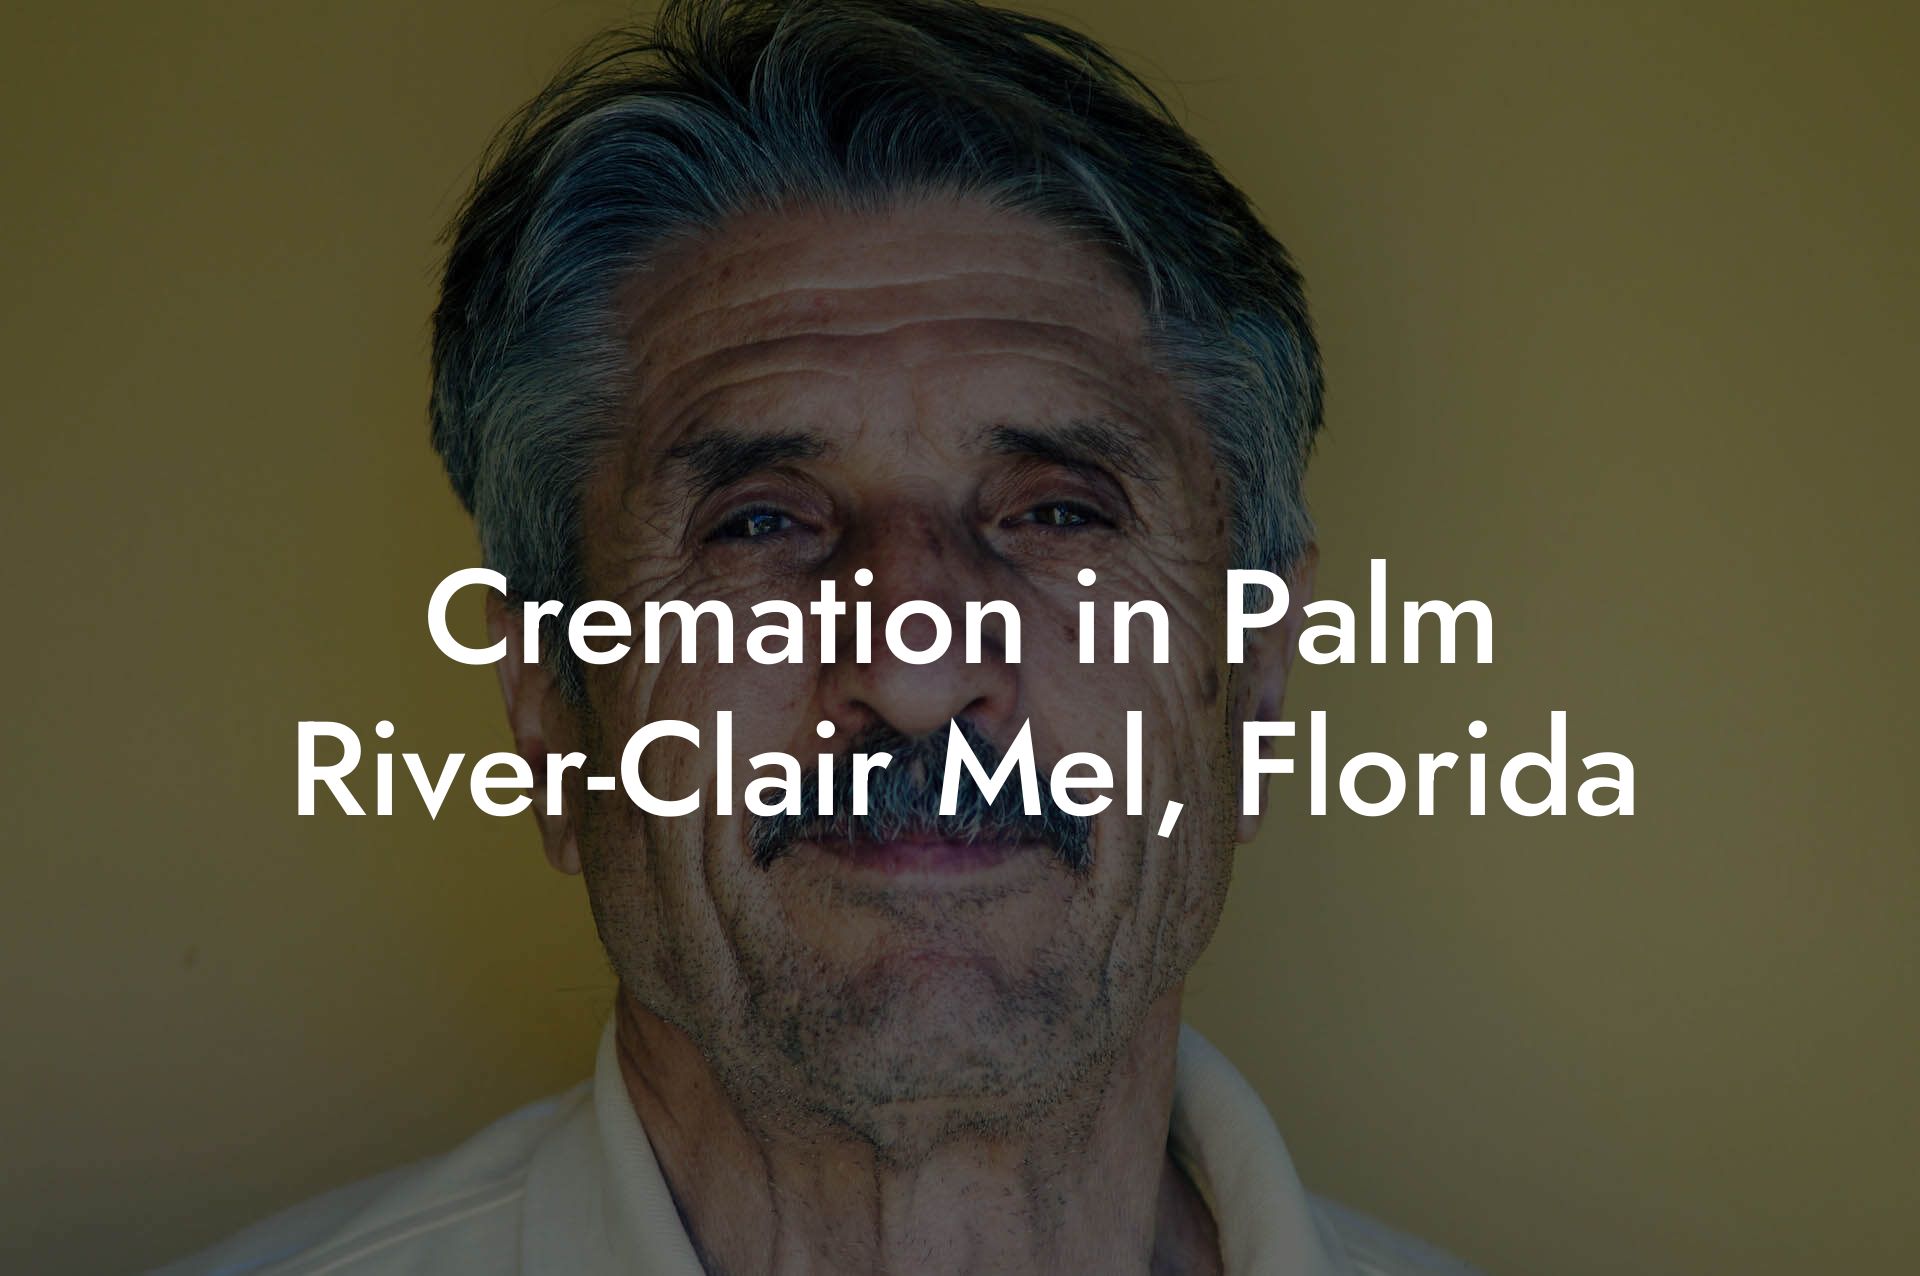 Cremation in Palm River-Clair Mel, Florida